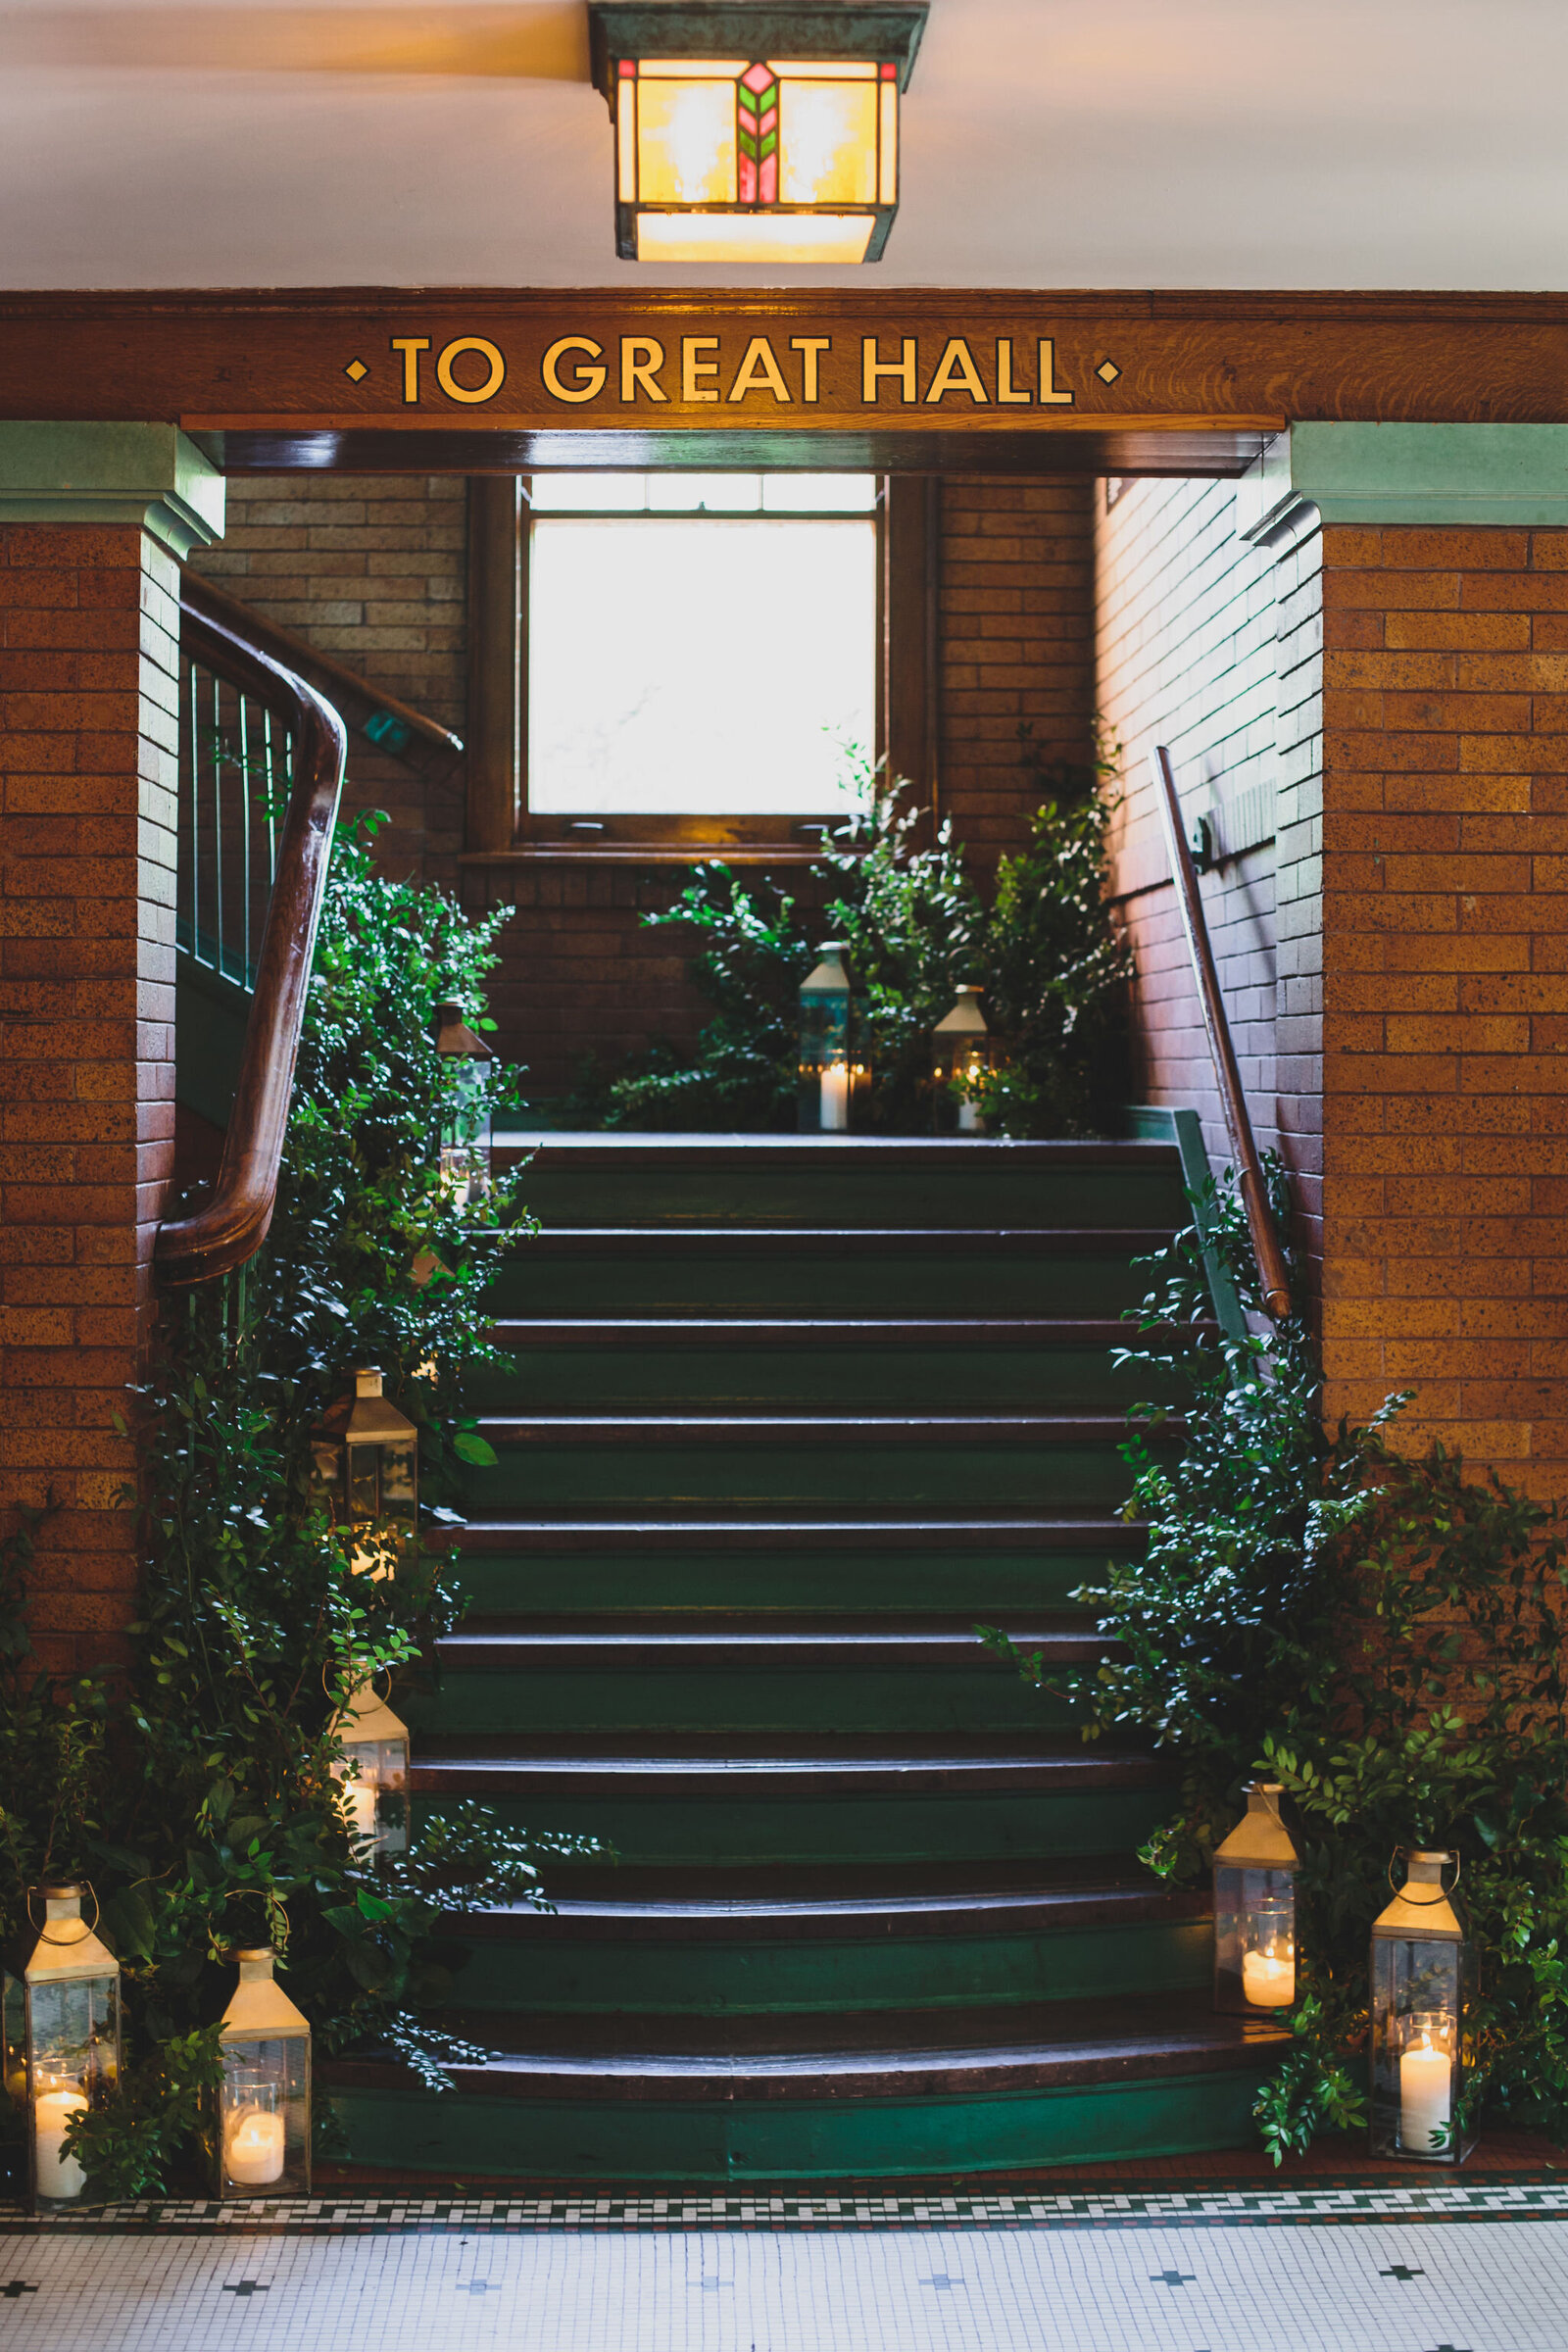 18-Cafe-Brauer-Wedding-staircase-floral